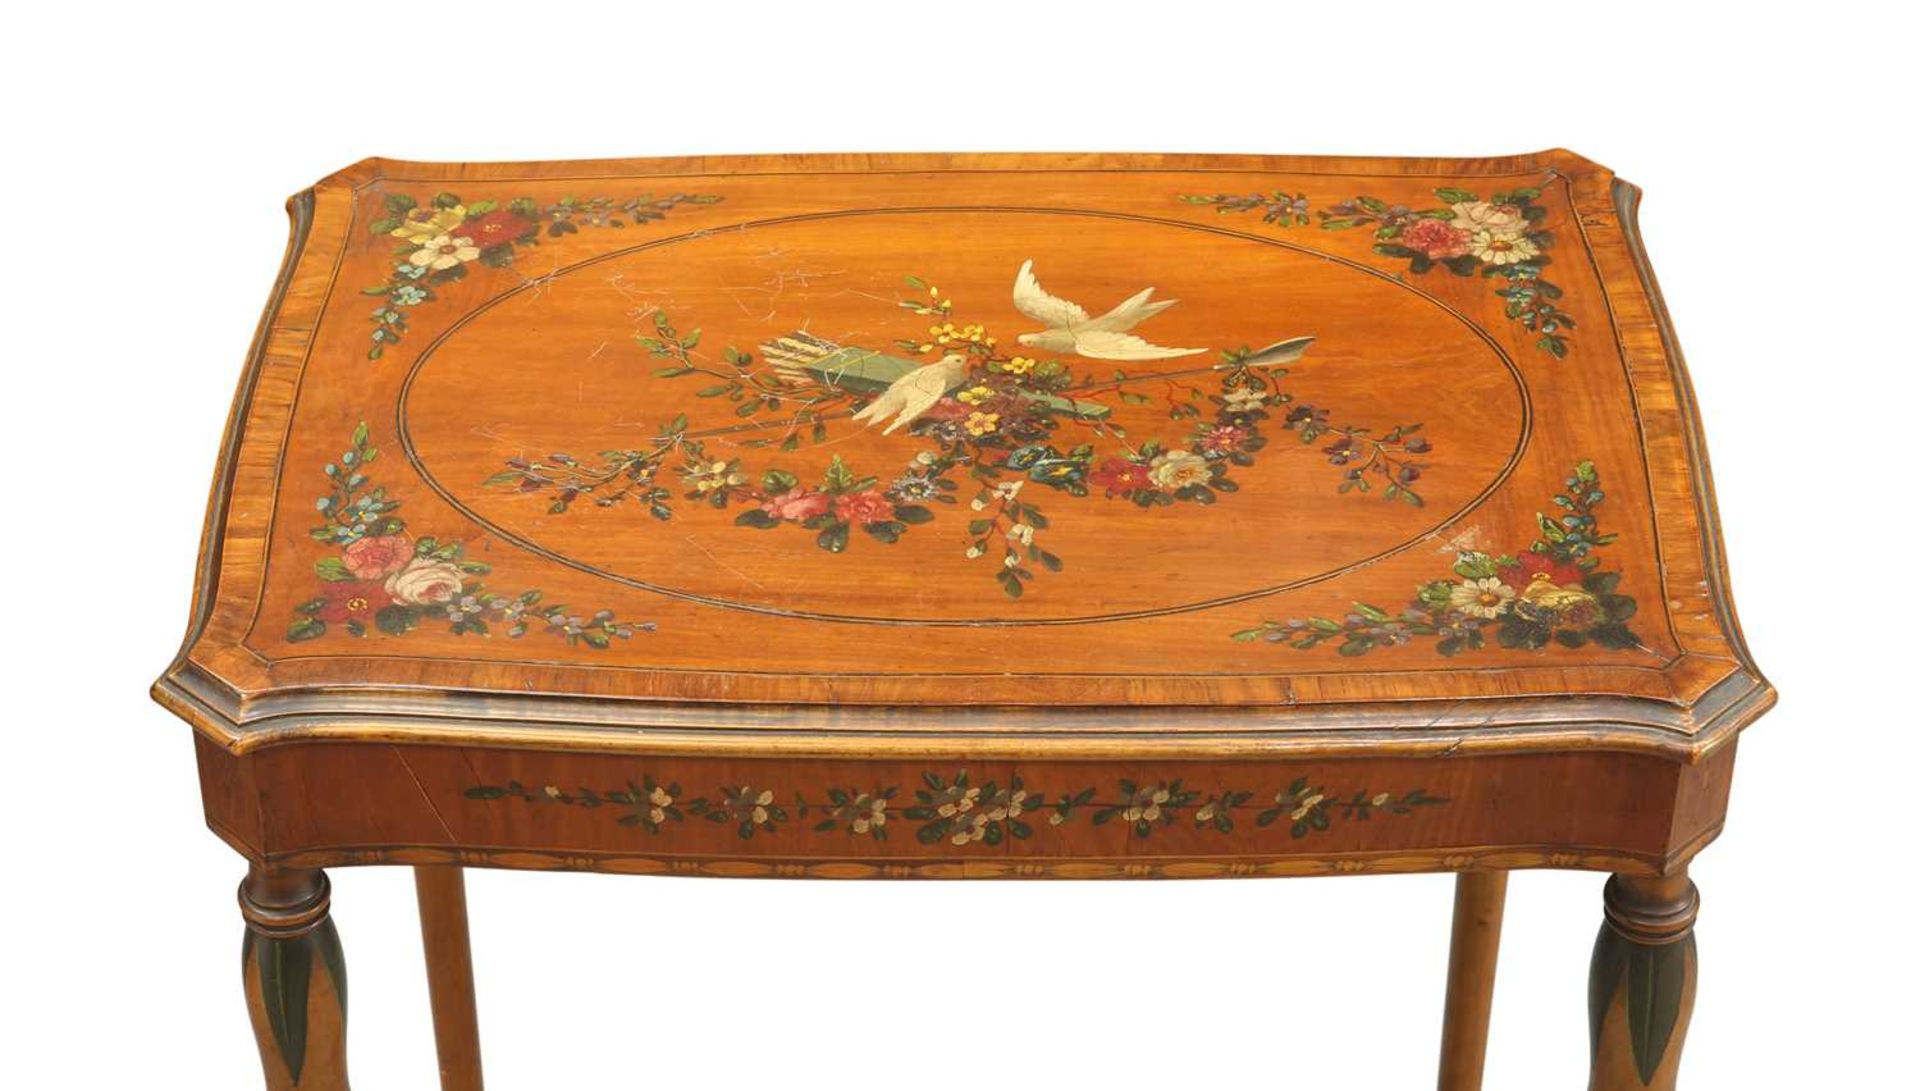 A LATE 19TH CENTURY PAINTED SATINWOOD OCCASIONAL TABLE, IN THE MANNER OF EDWARDS & ROBERTS - Image 2 of 2